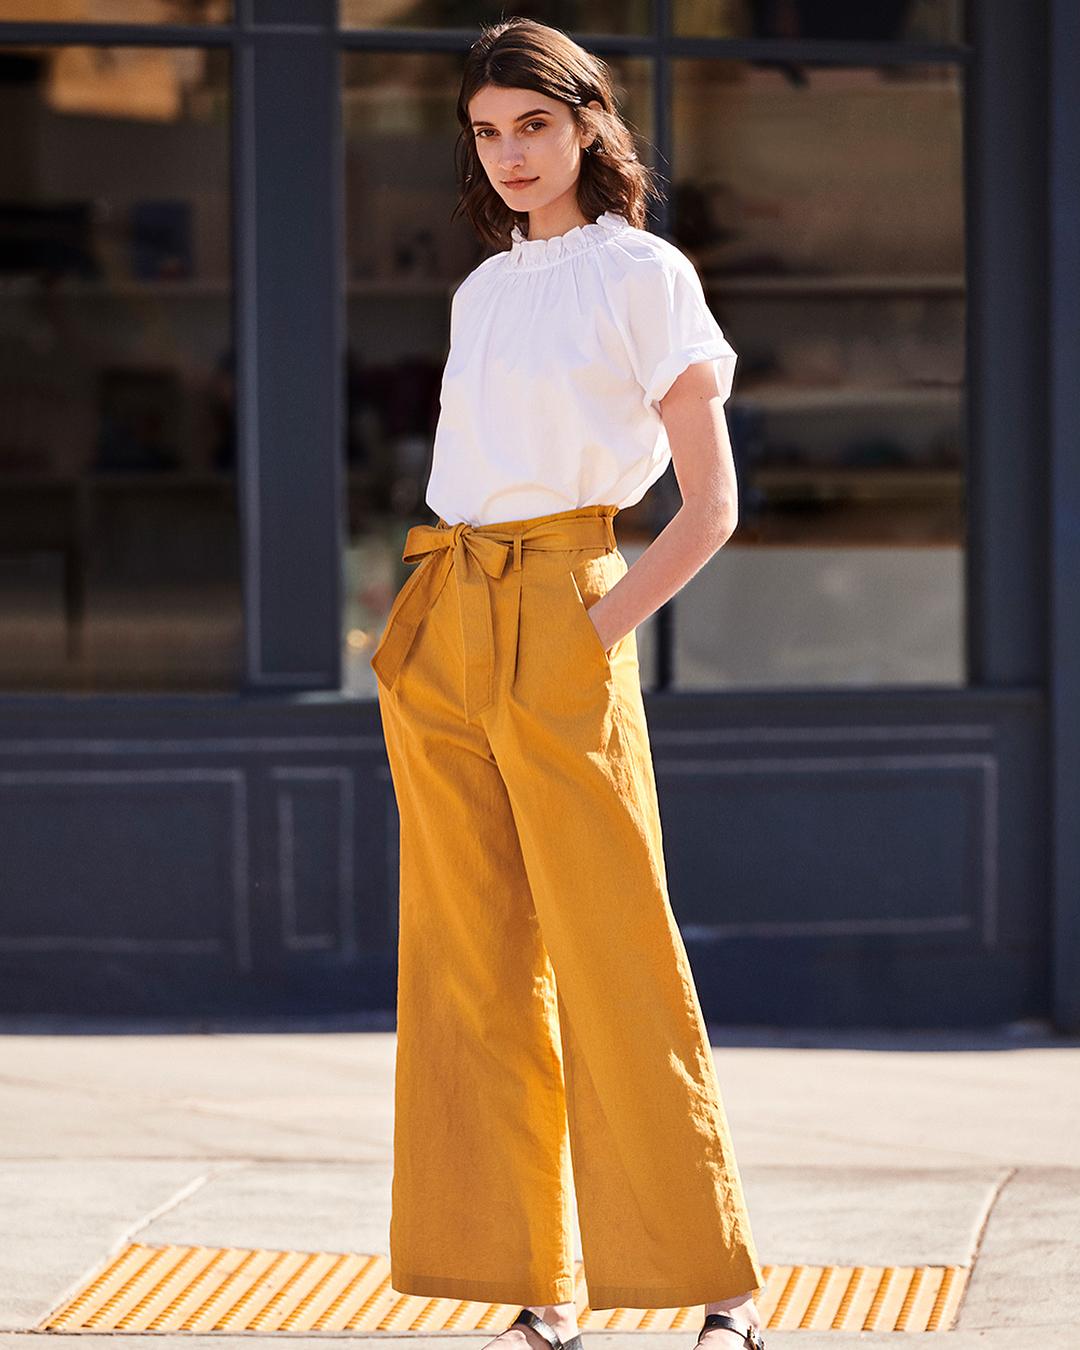 UNIQLO on X: These wide leg pants are going to be in every